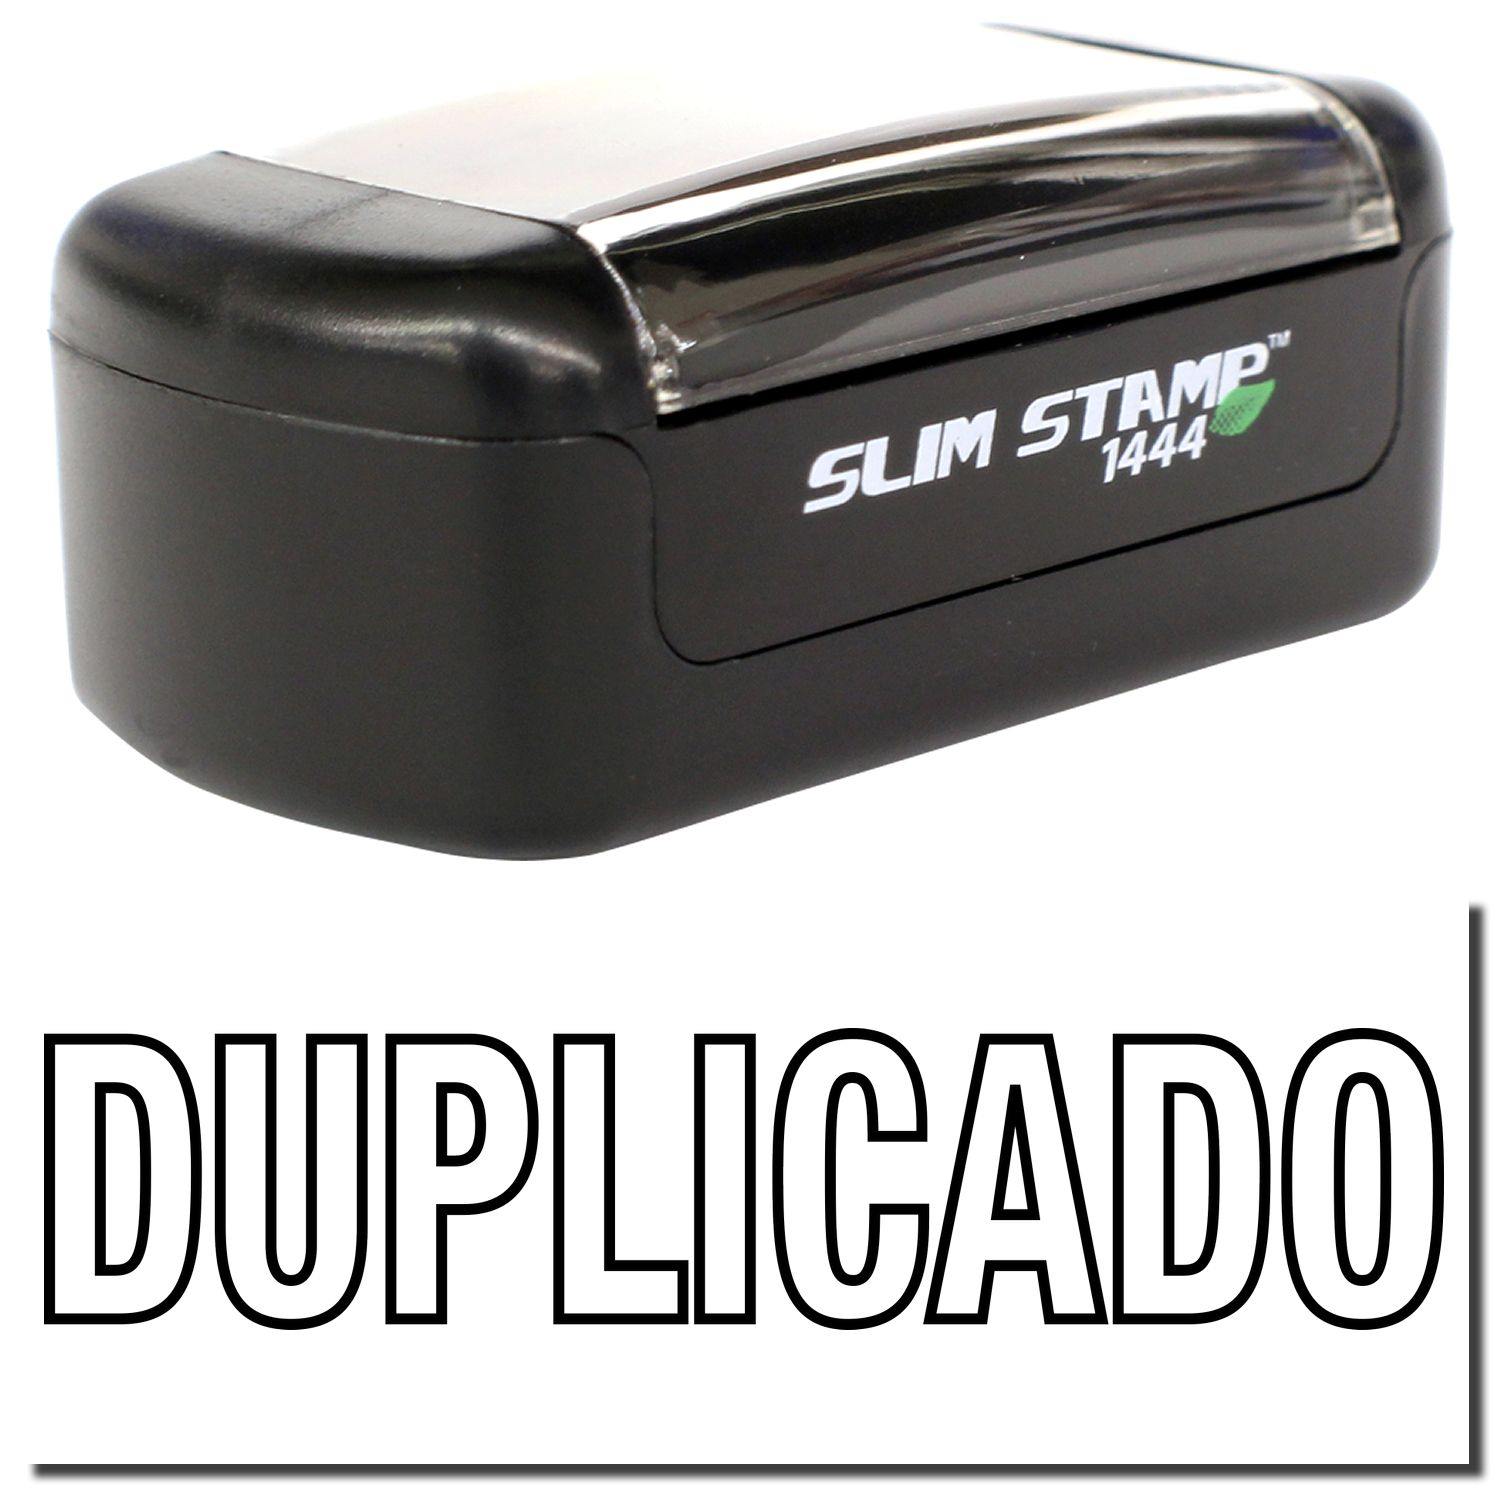 A stock office pre-inked stamp with a stamped image showing how the text "DUPLICADO" in an outline font is displayed after stamping.